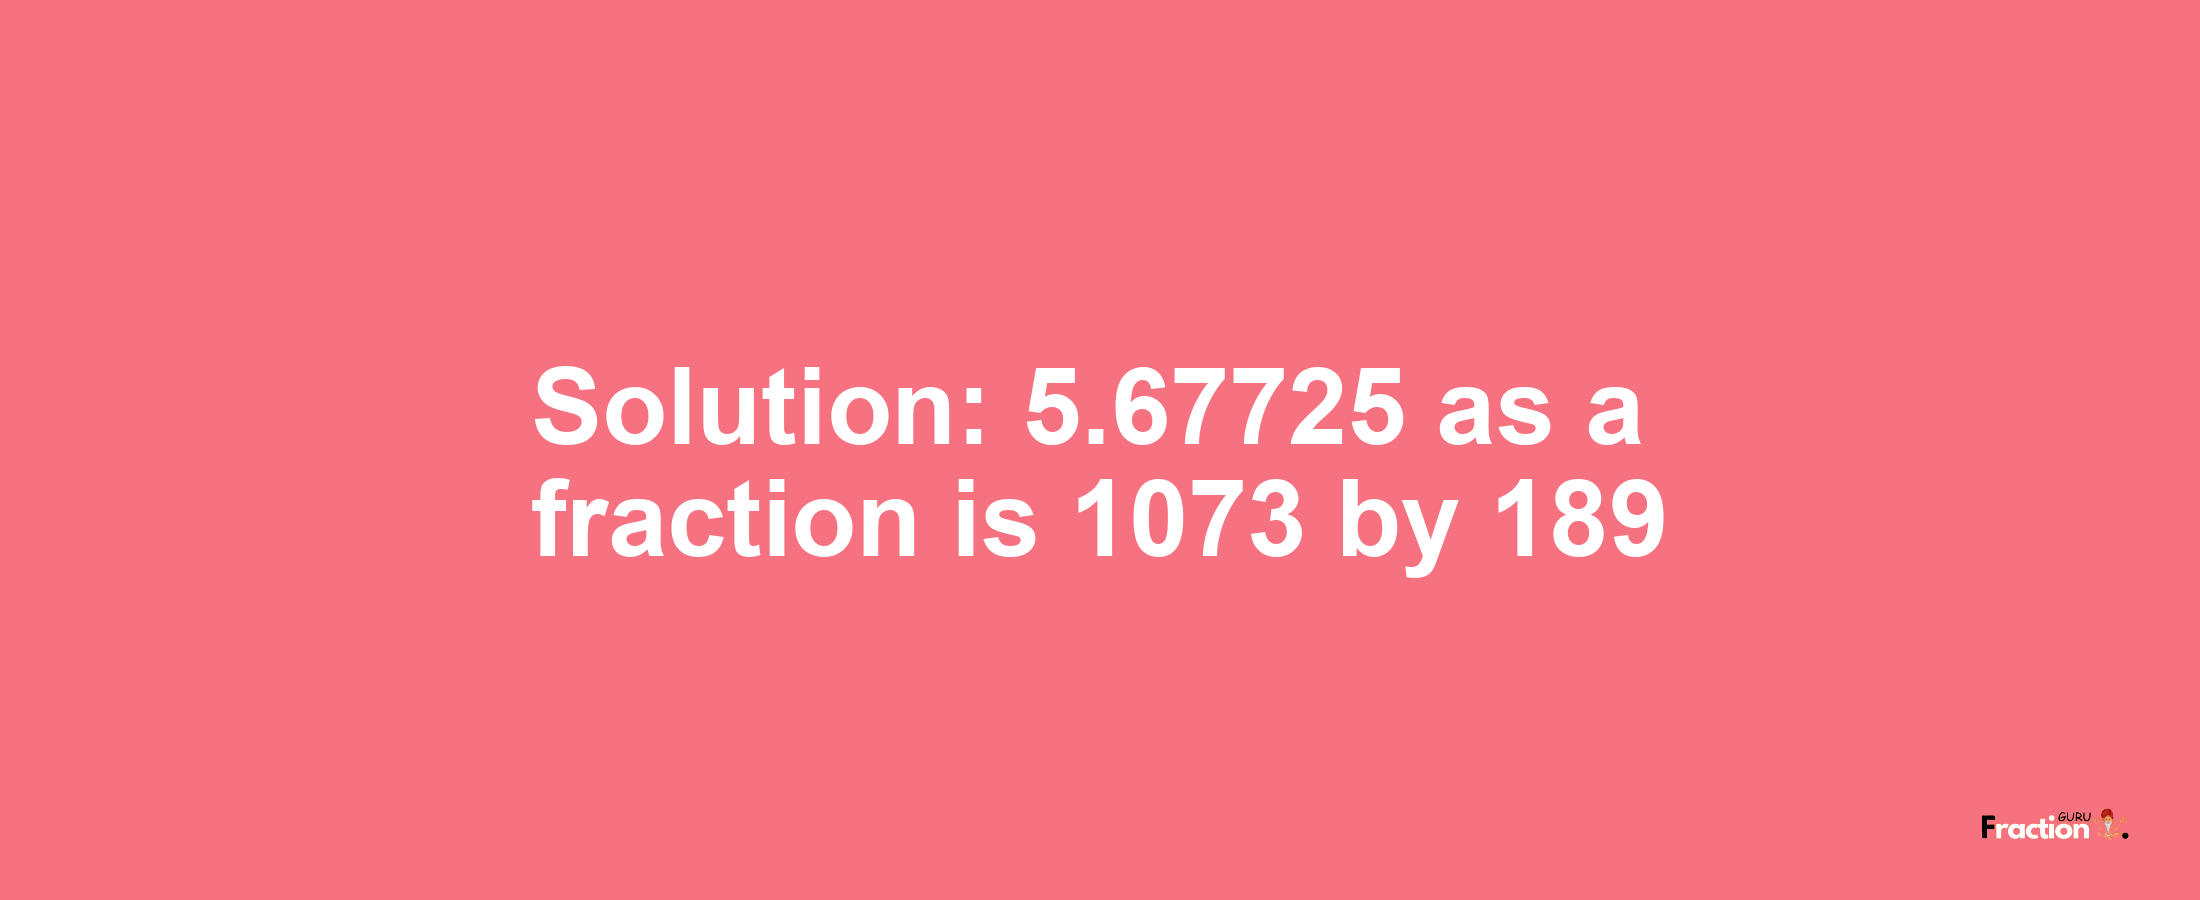 Solution:5.67725 as a fraction is 1073/189